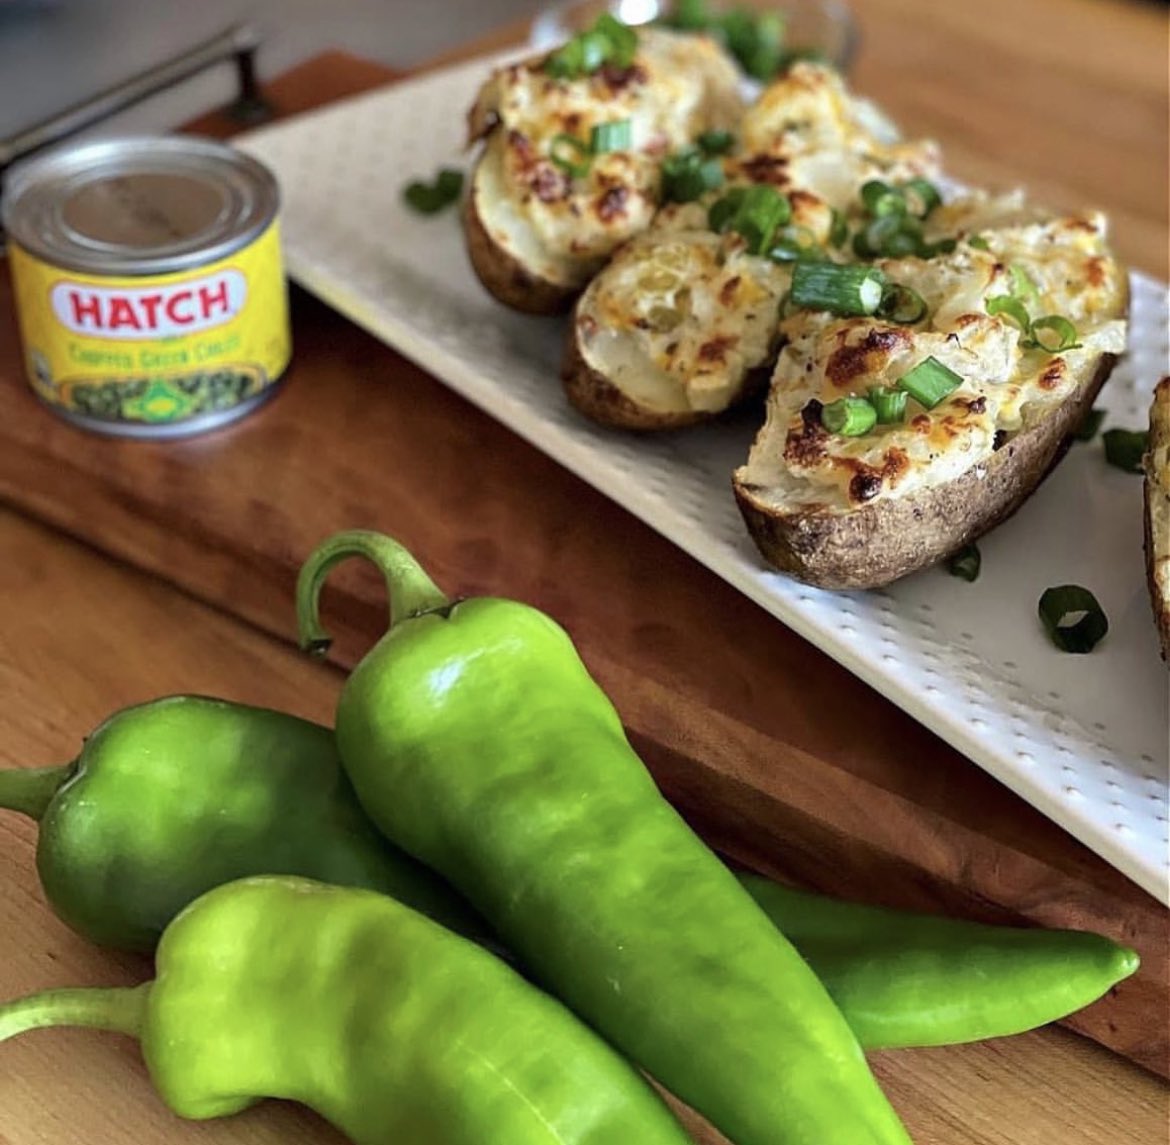 EXTRA SPECIAL SIDE, Hatch Green Chile Twice Baked Potatoes
Visit hatchchileco.com
and ceceliasgoodstuff.com
#ceceliasgoodstuff #hatchgreenchile #hatchchileco 
 #NewMexico #HatchNewMexico
#OnlyInNewMexico 
#NMTrue
#GlutenFree
#Sprouts #Albertsons #WalMart #Amazon